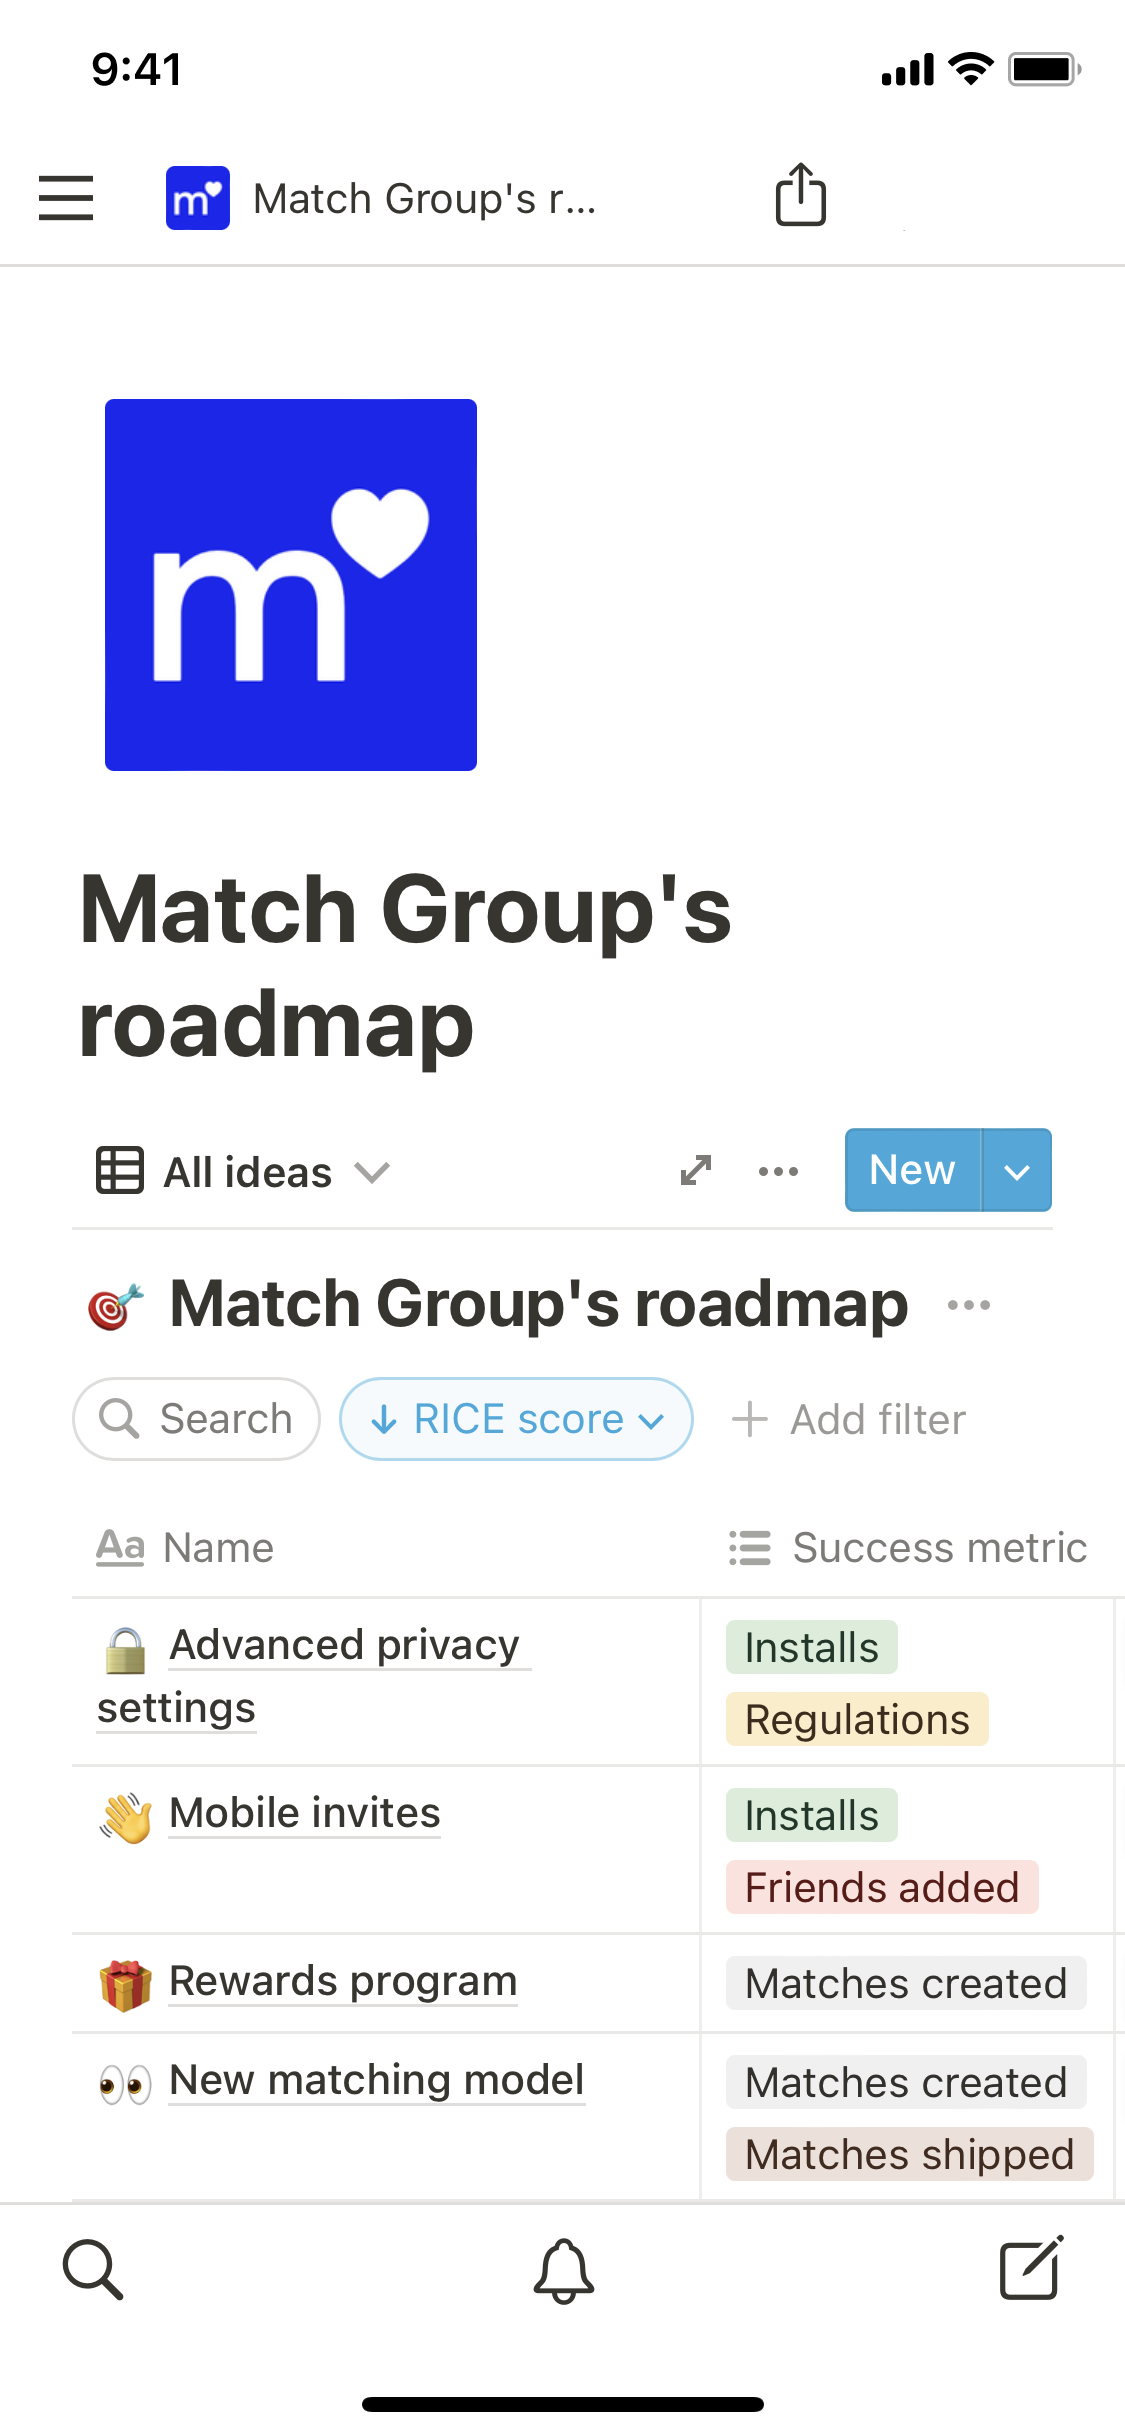 The mobile image for the Match Group's roadmap template